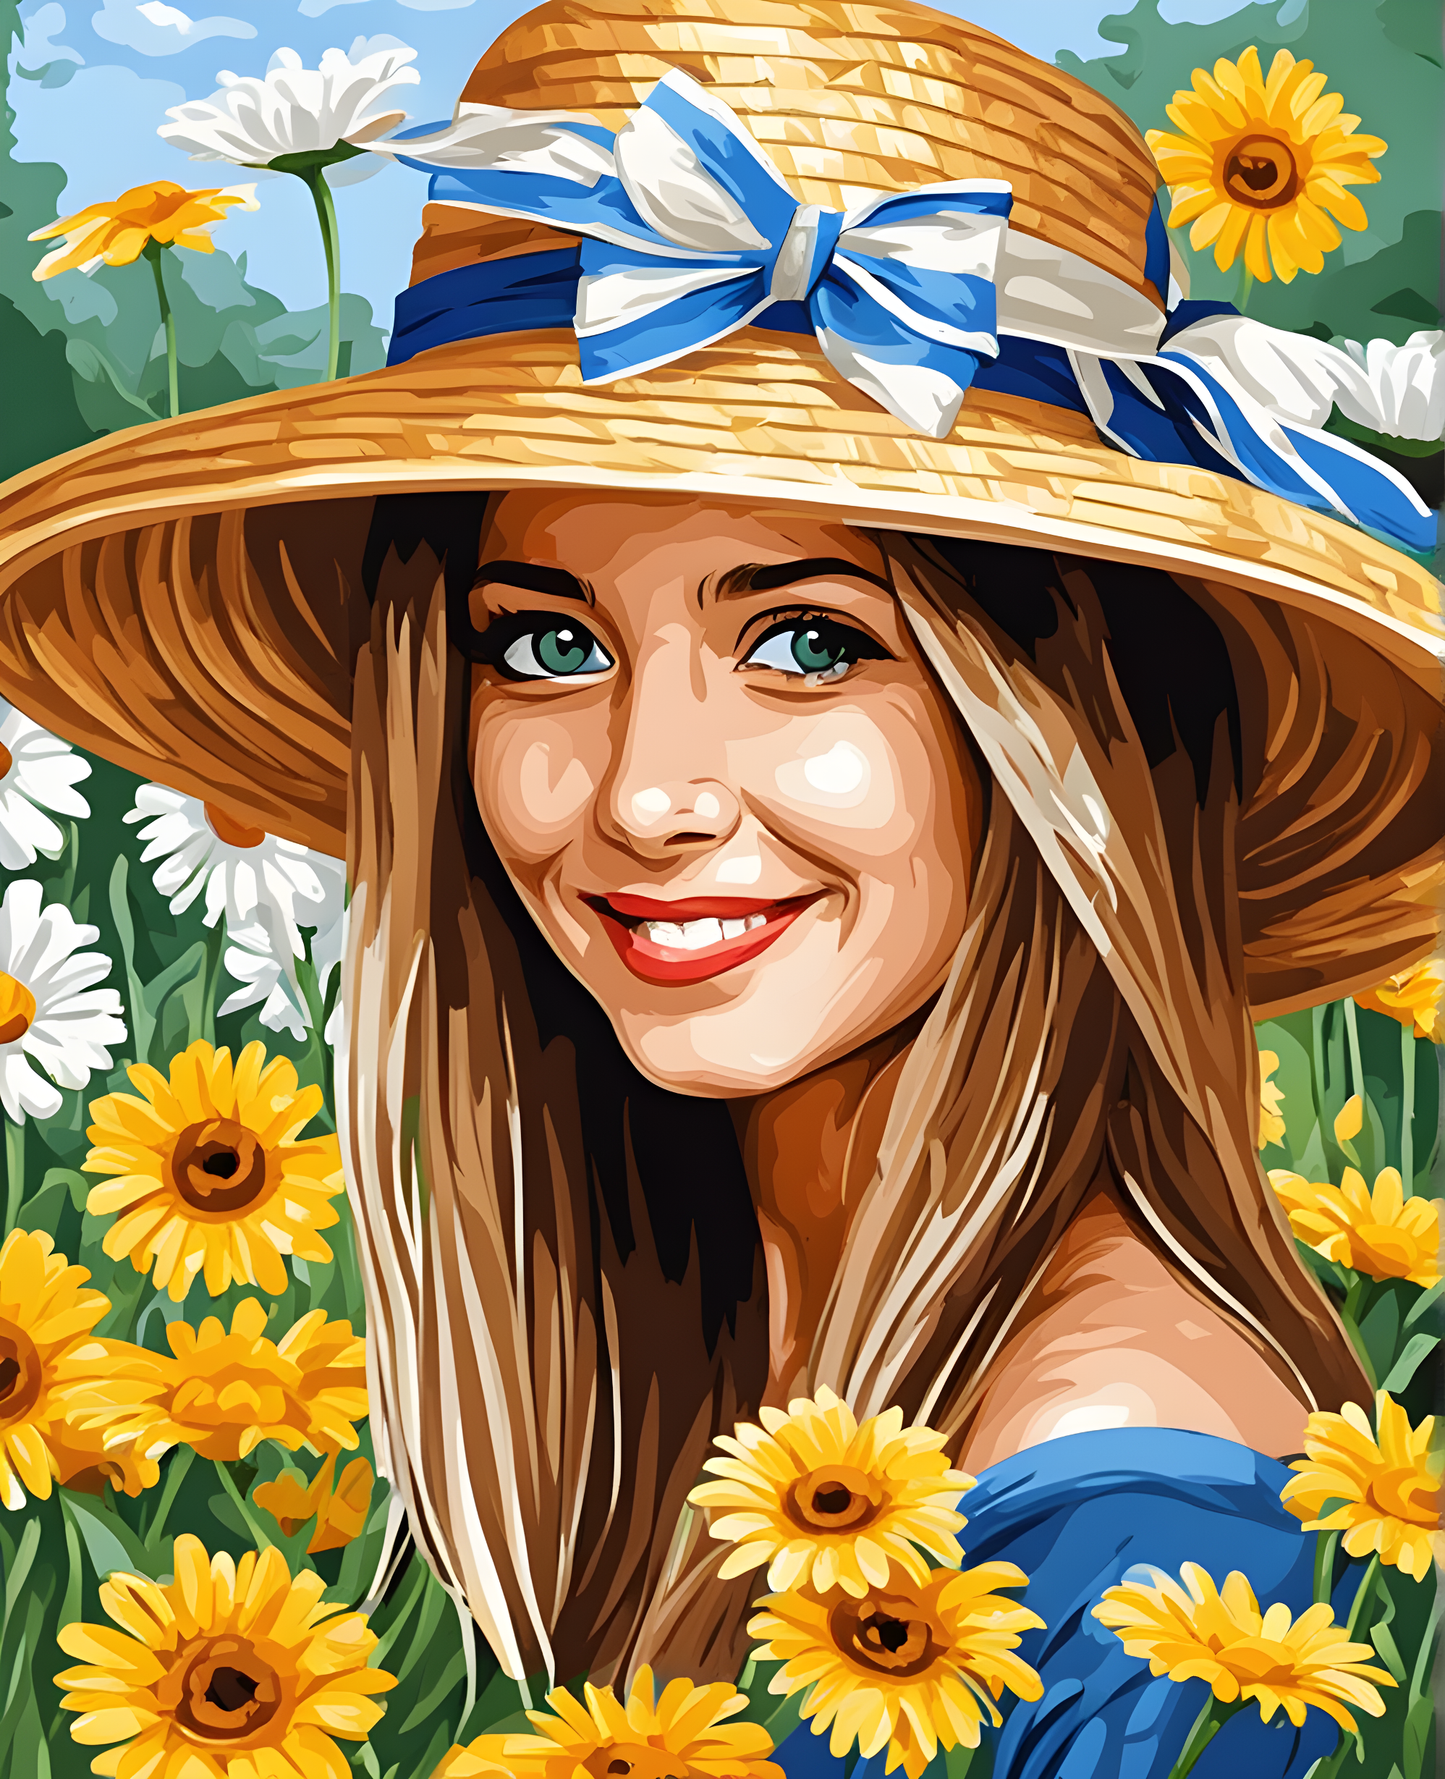 Straw Hat and Daisies (1) - Van-Go Paint-By-Number Kit